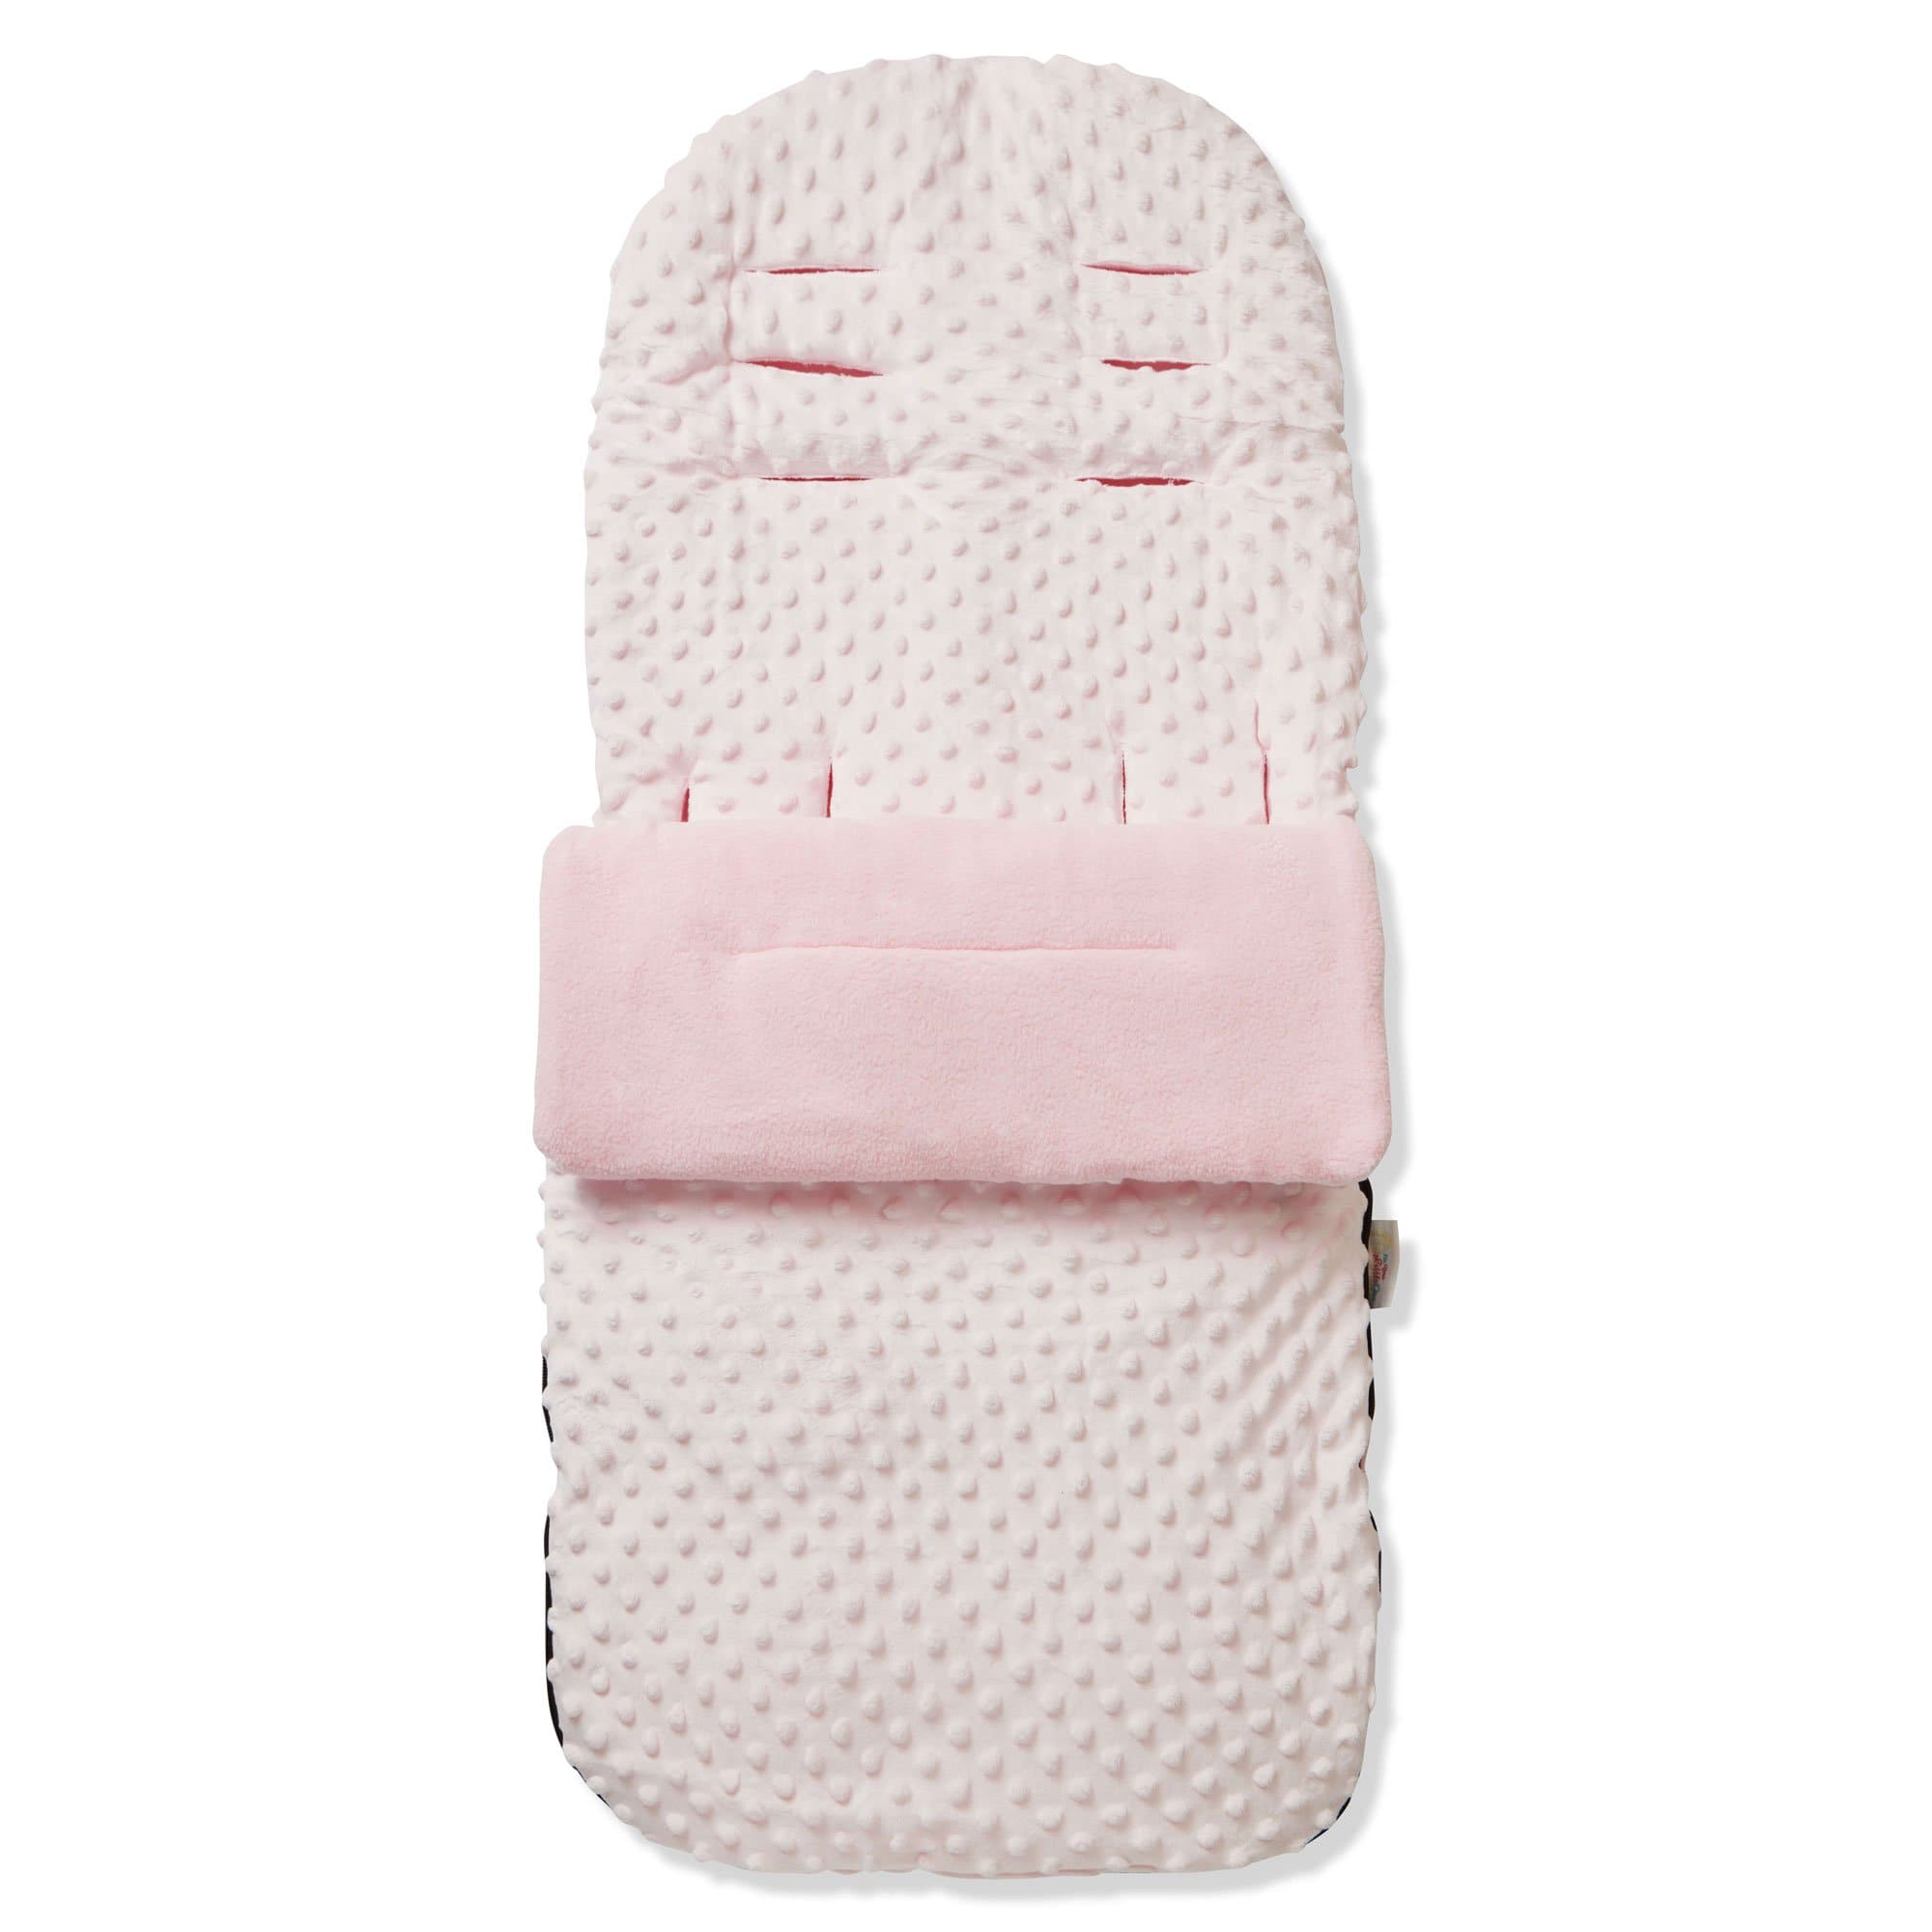 Dimple Footmuff / Cosy Toes Compatible with Looping - For Your Little One